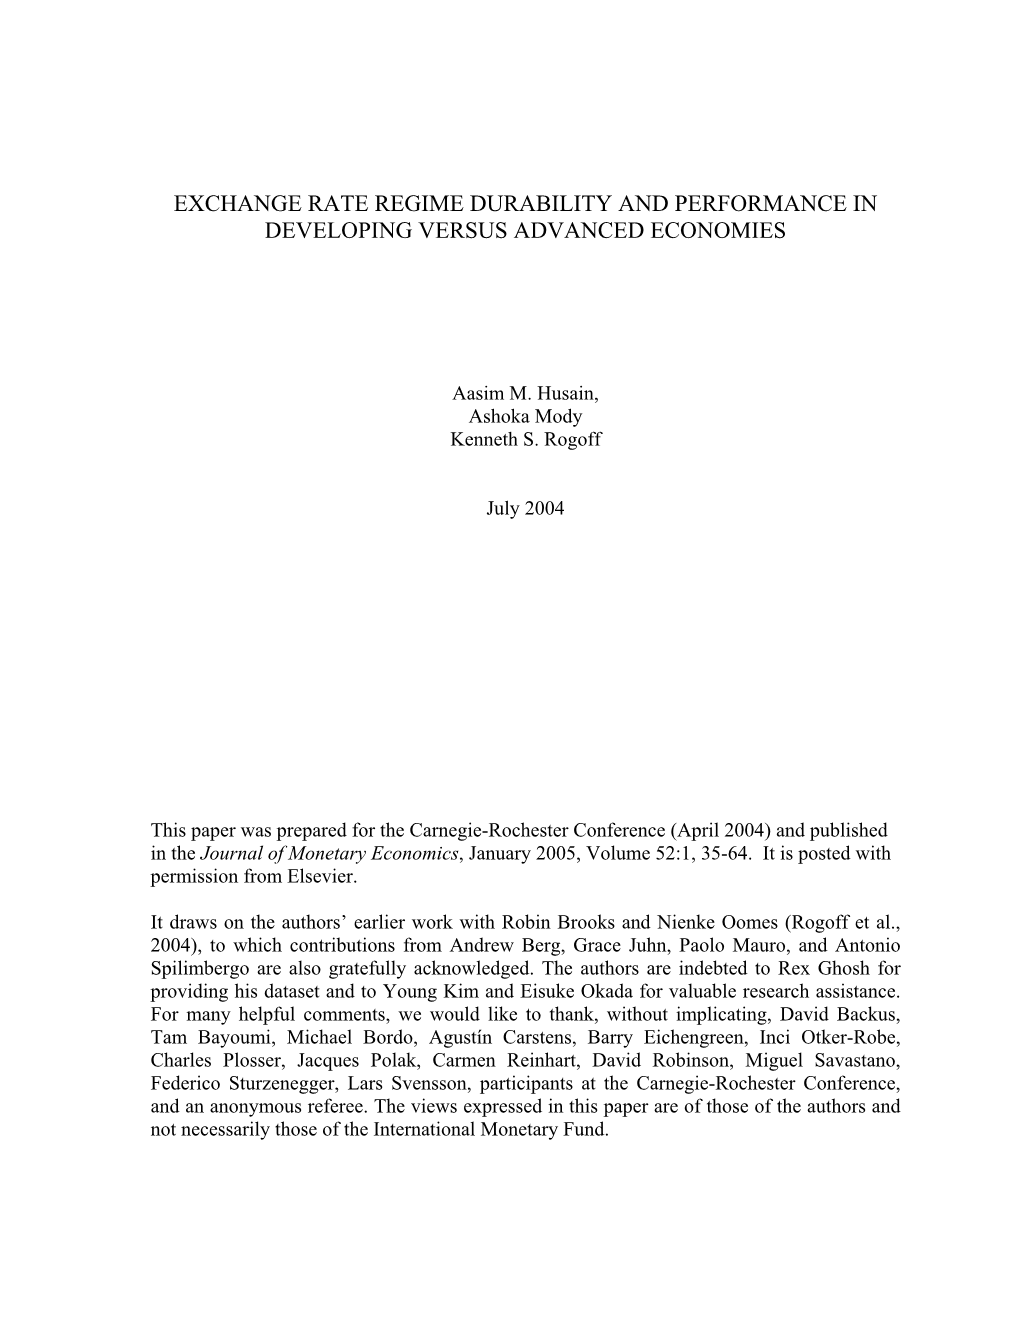 Exchange Rate Regime Durability and Performance in Developing Versus Advanced Economies